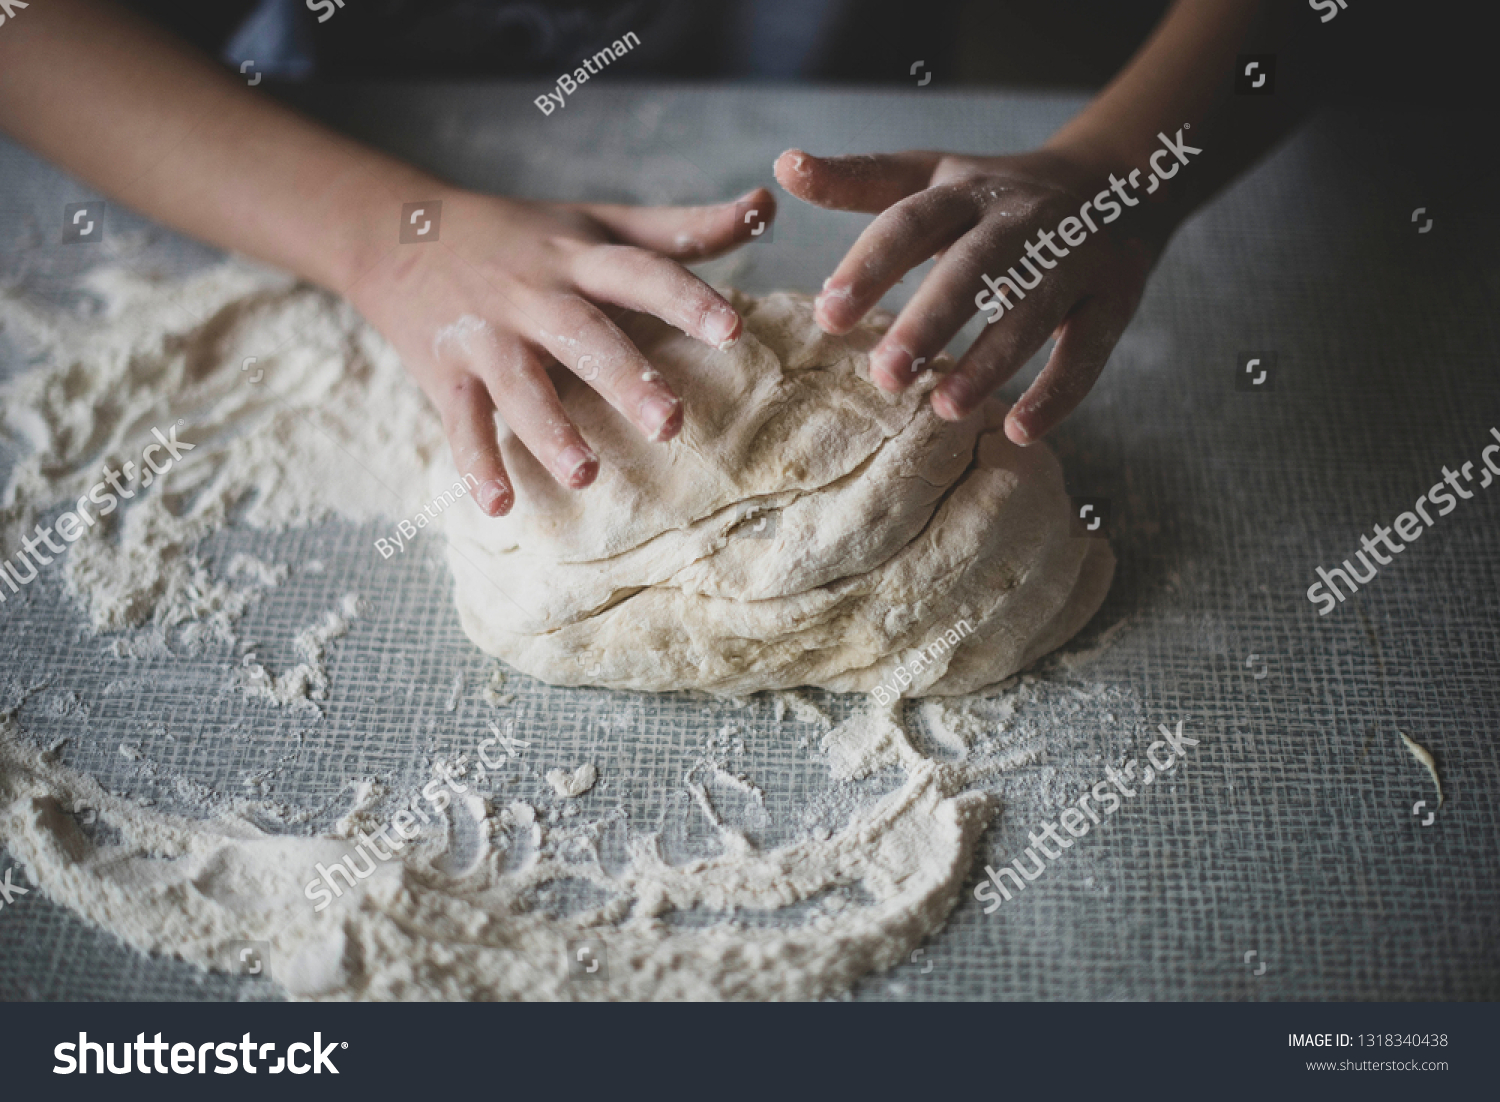 cooking a dough. hands in flour. food on the table #1318340438